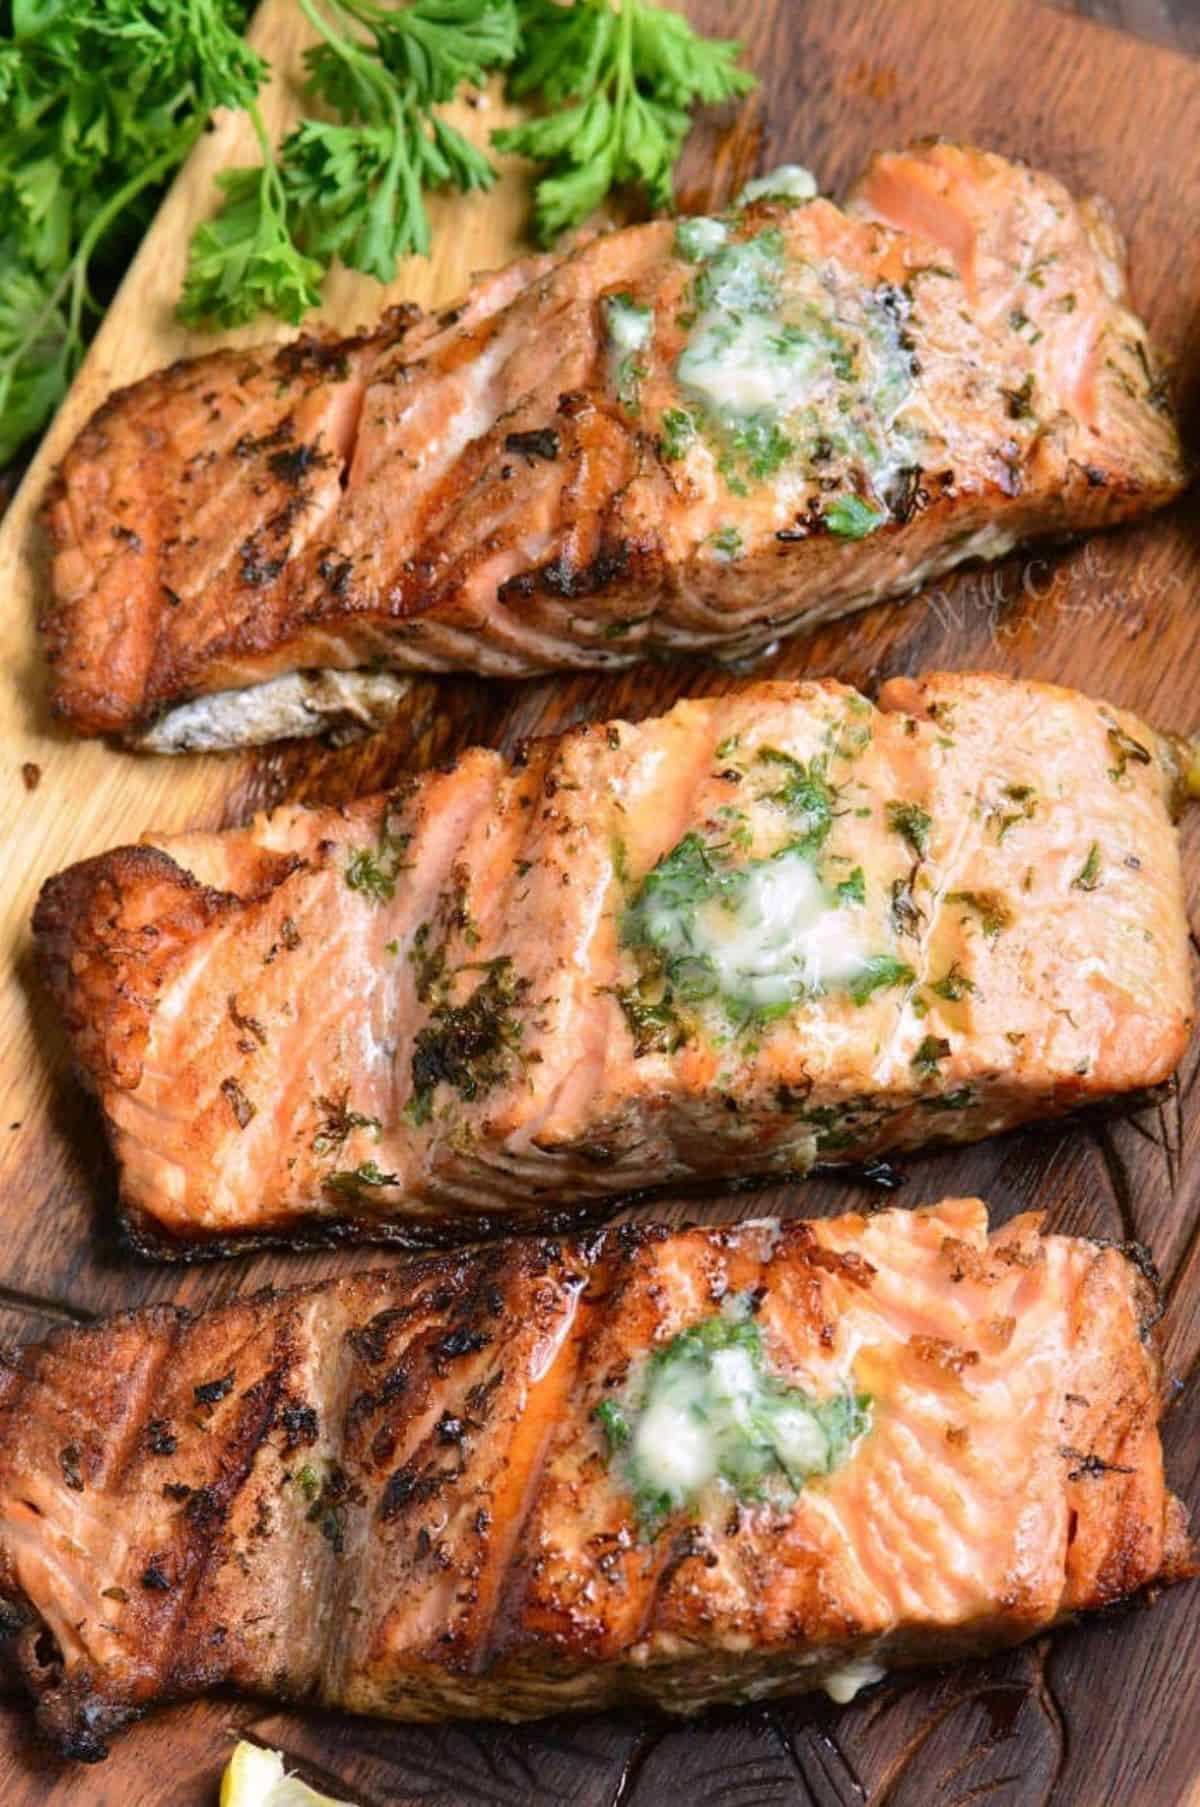 three grilled salmon filets topped with garlic butter on the wooden plate.